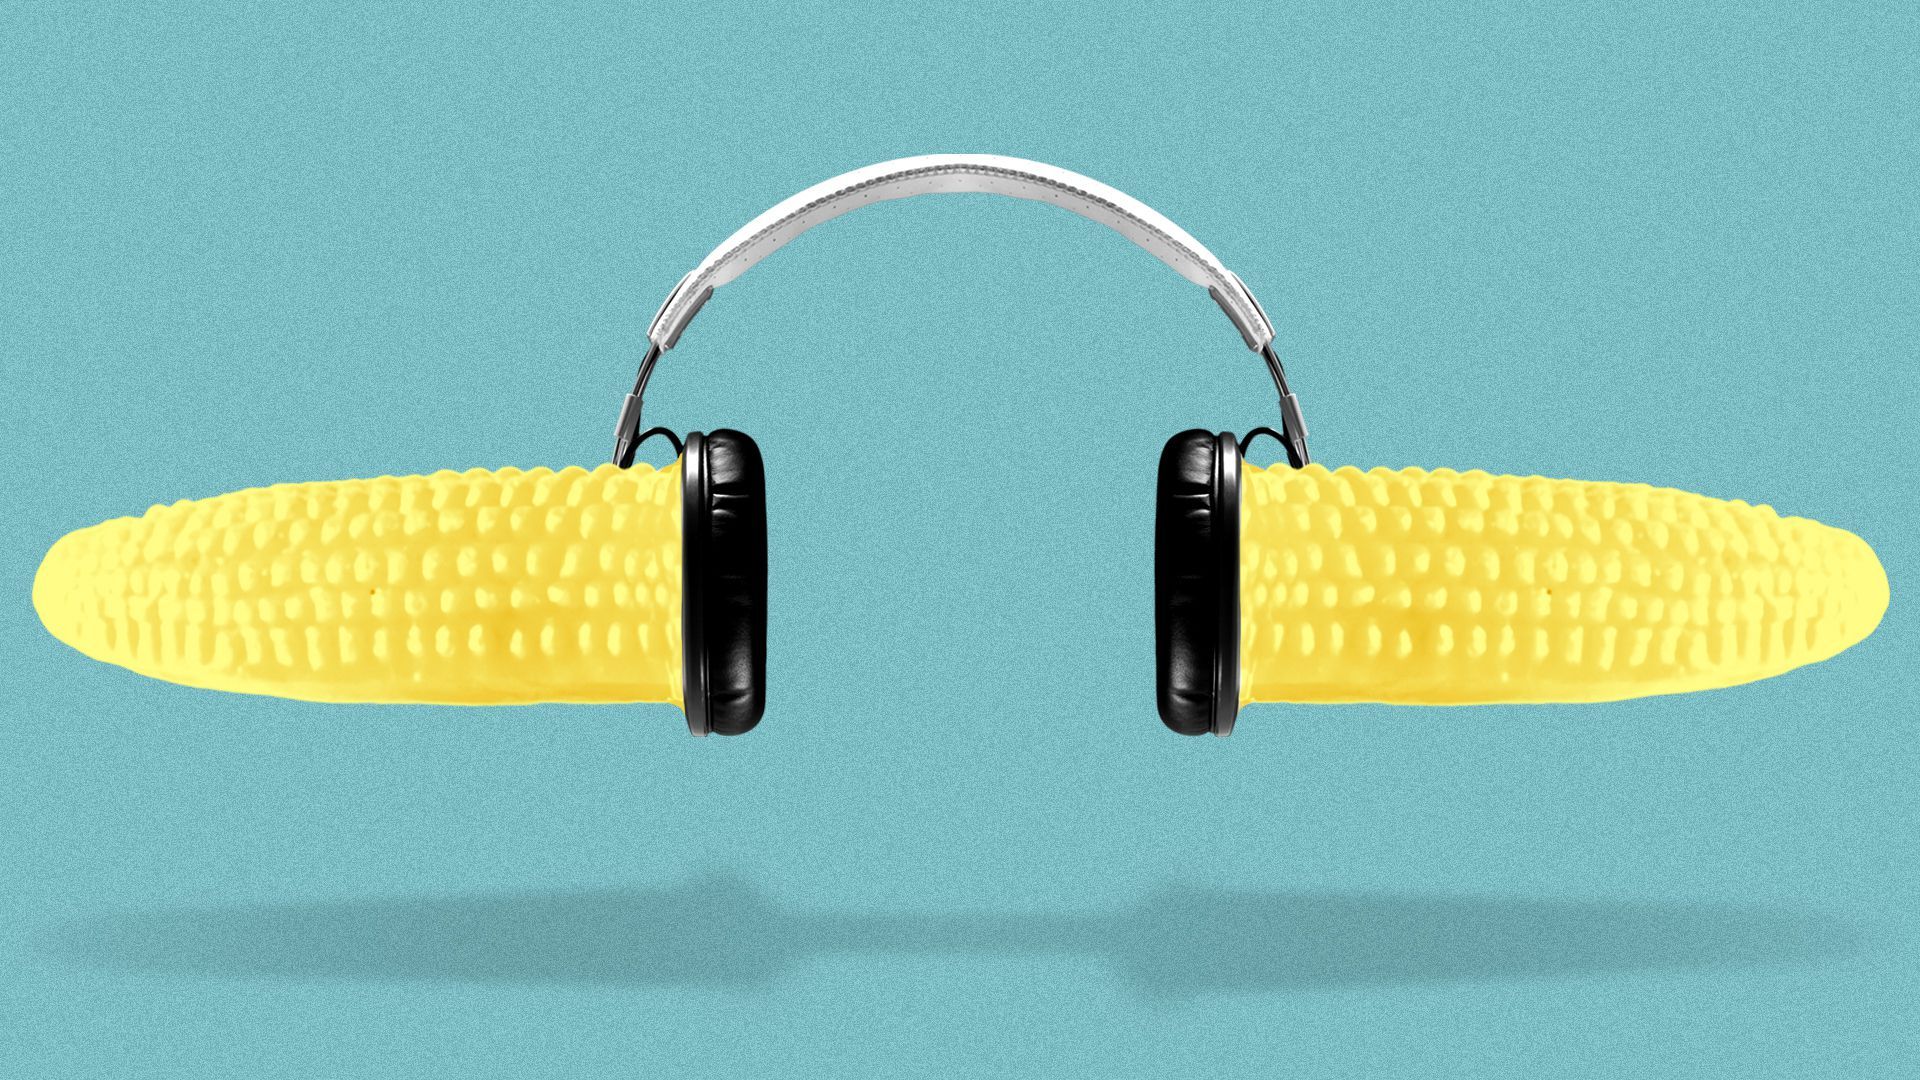 Illustration of a pair of headphones with plastic corn cob holders sticking out of them.